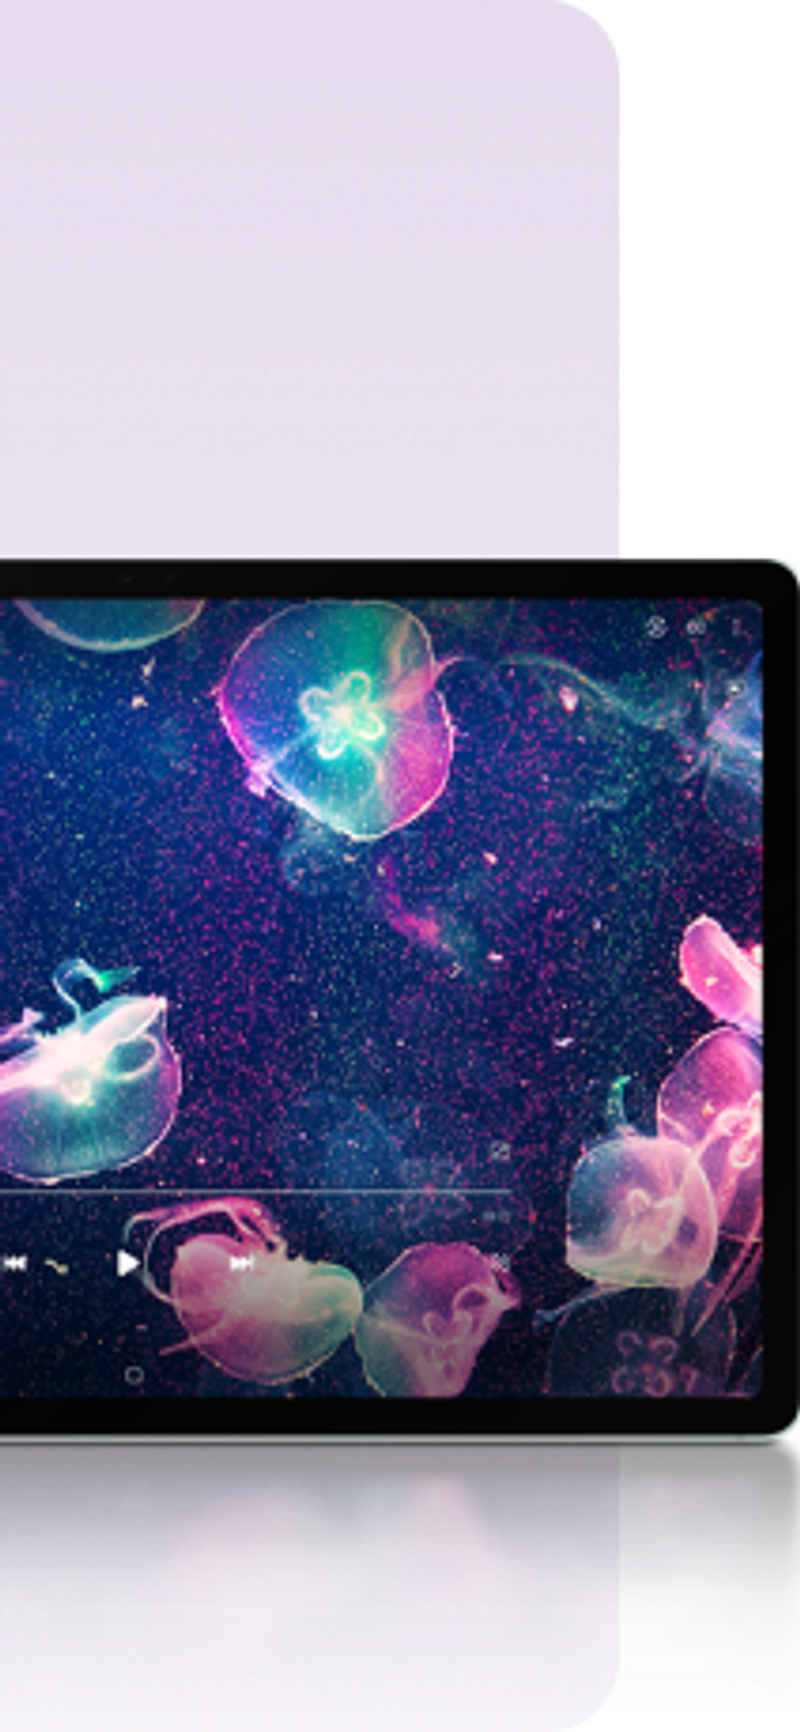 Galaxy Tab with a picture of jellyfishes on a galaxy background.